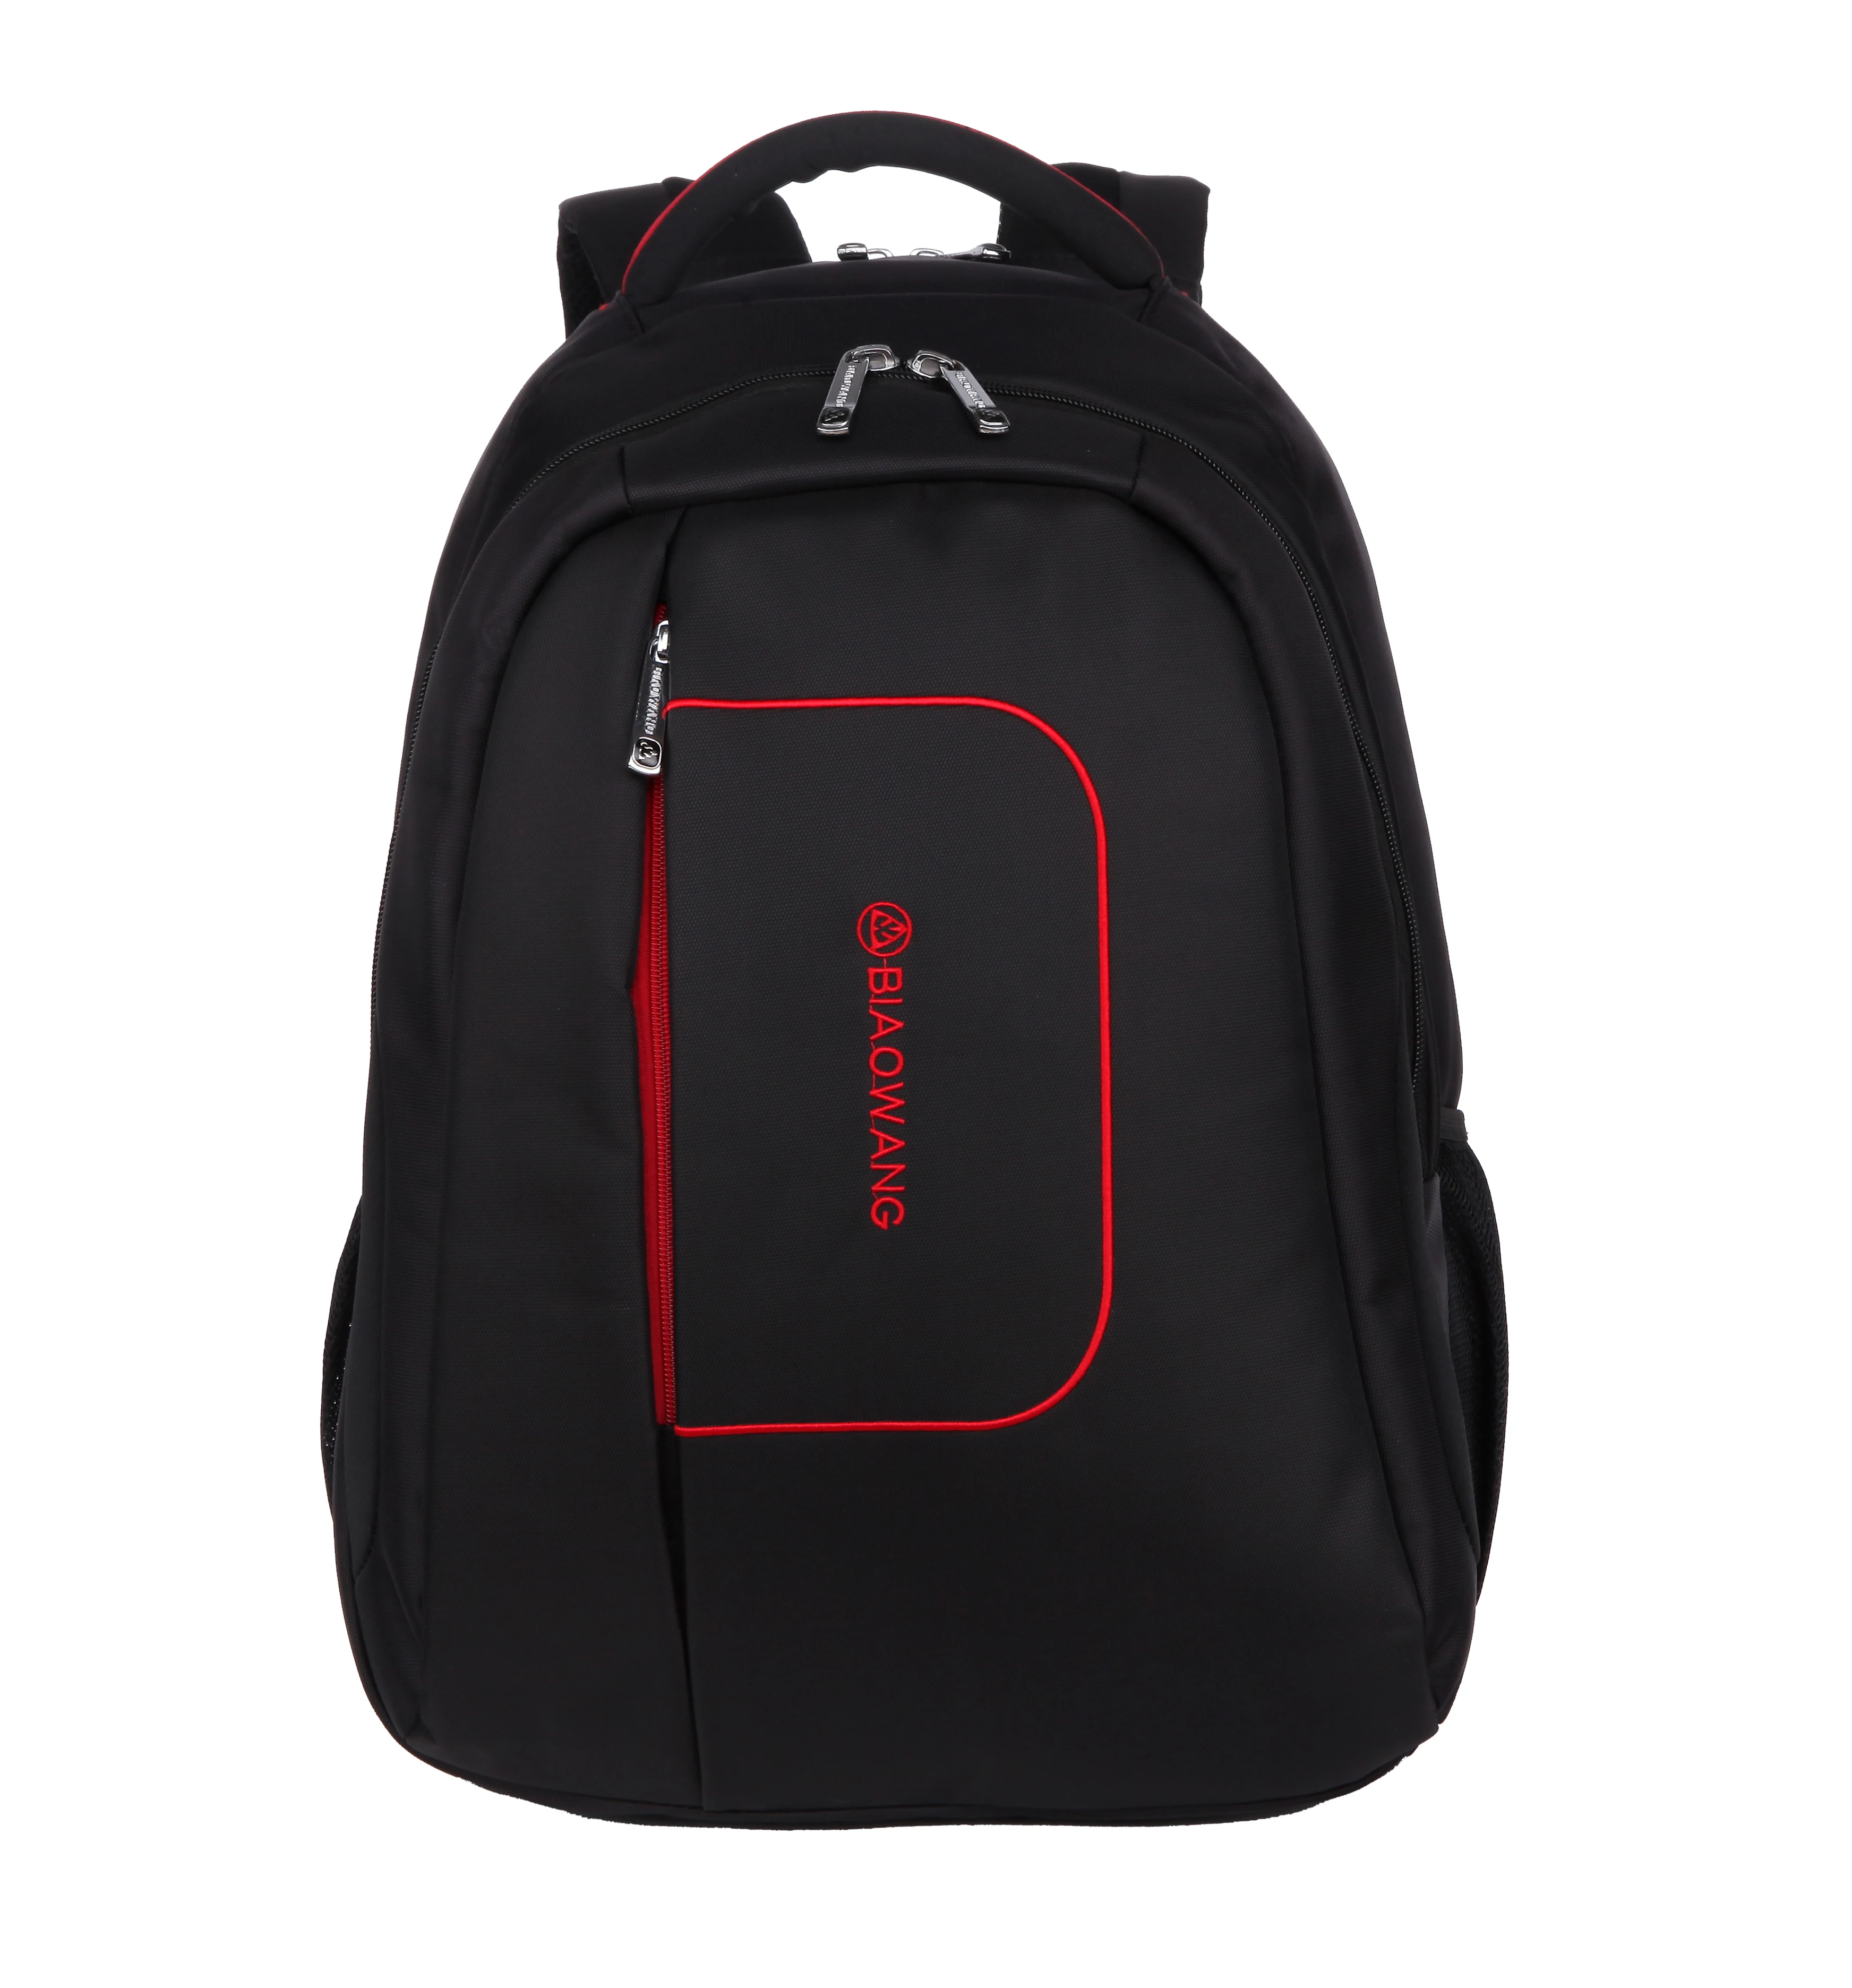 

School bags for college students back packs sports bags backpack black girls school bags backpack for teenagers, Customized